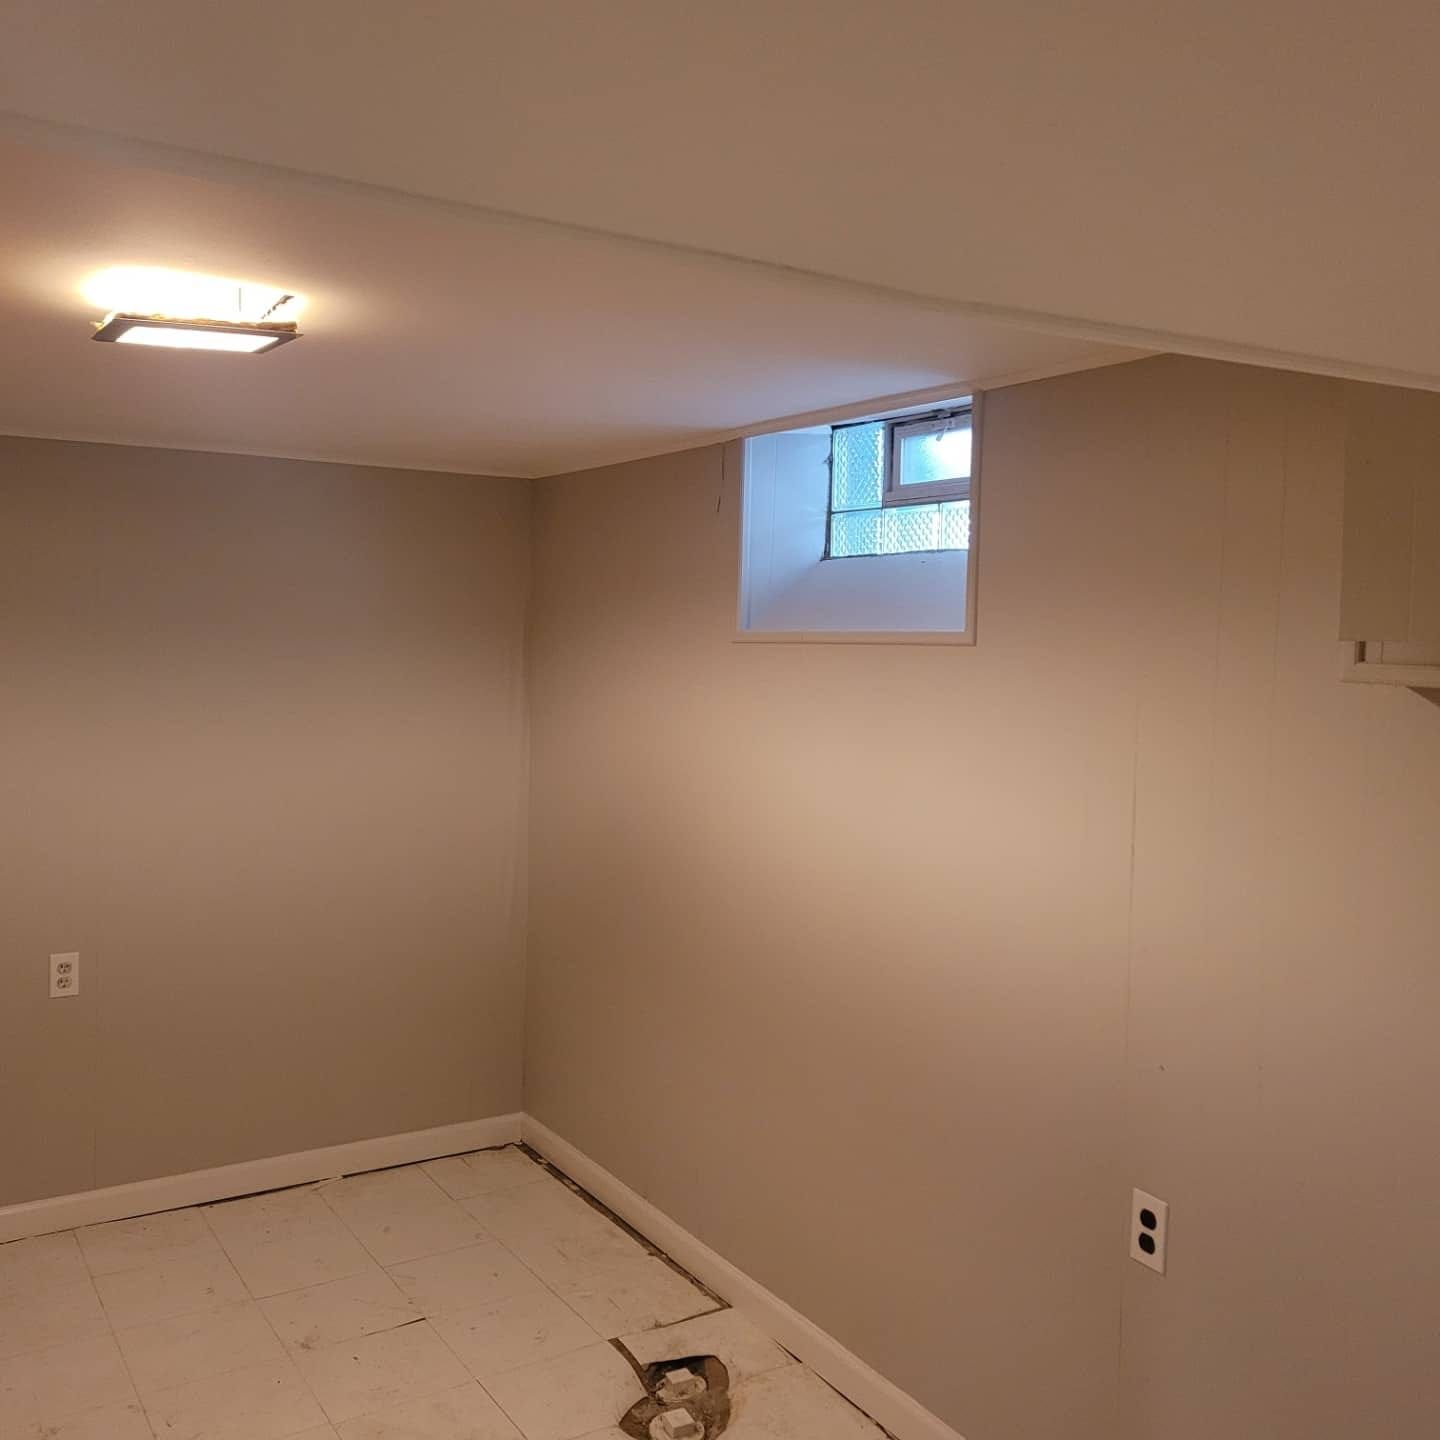 Painting for Joe's Drywall And Painting in Detroit, MI 